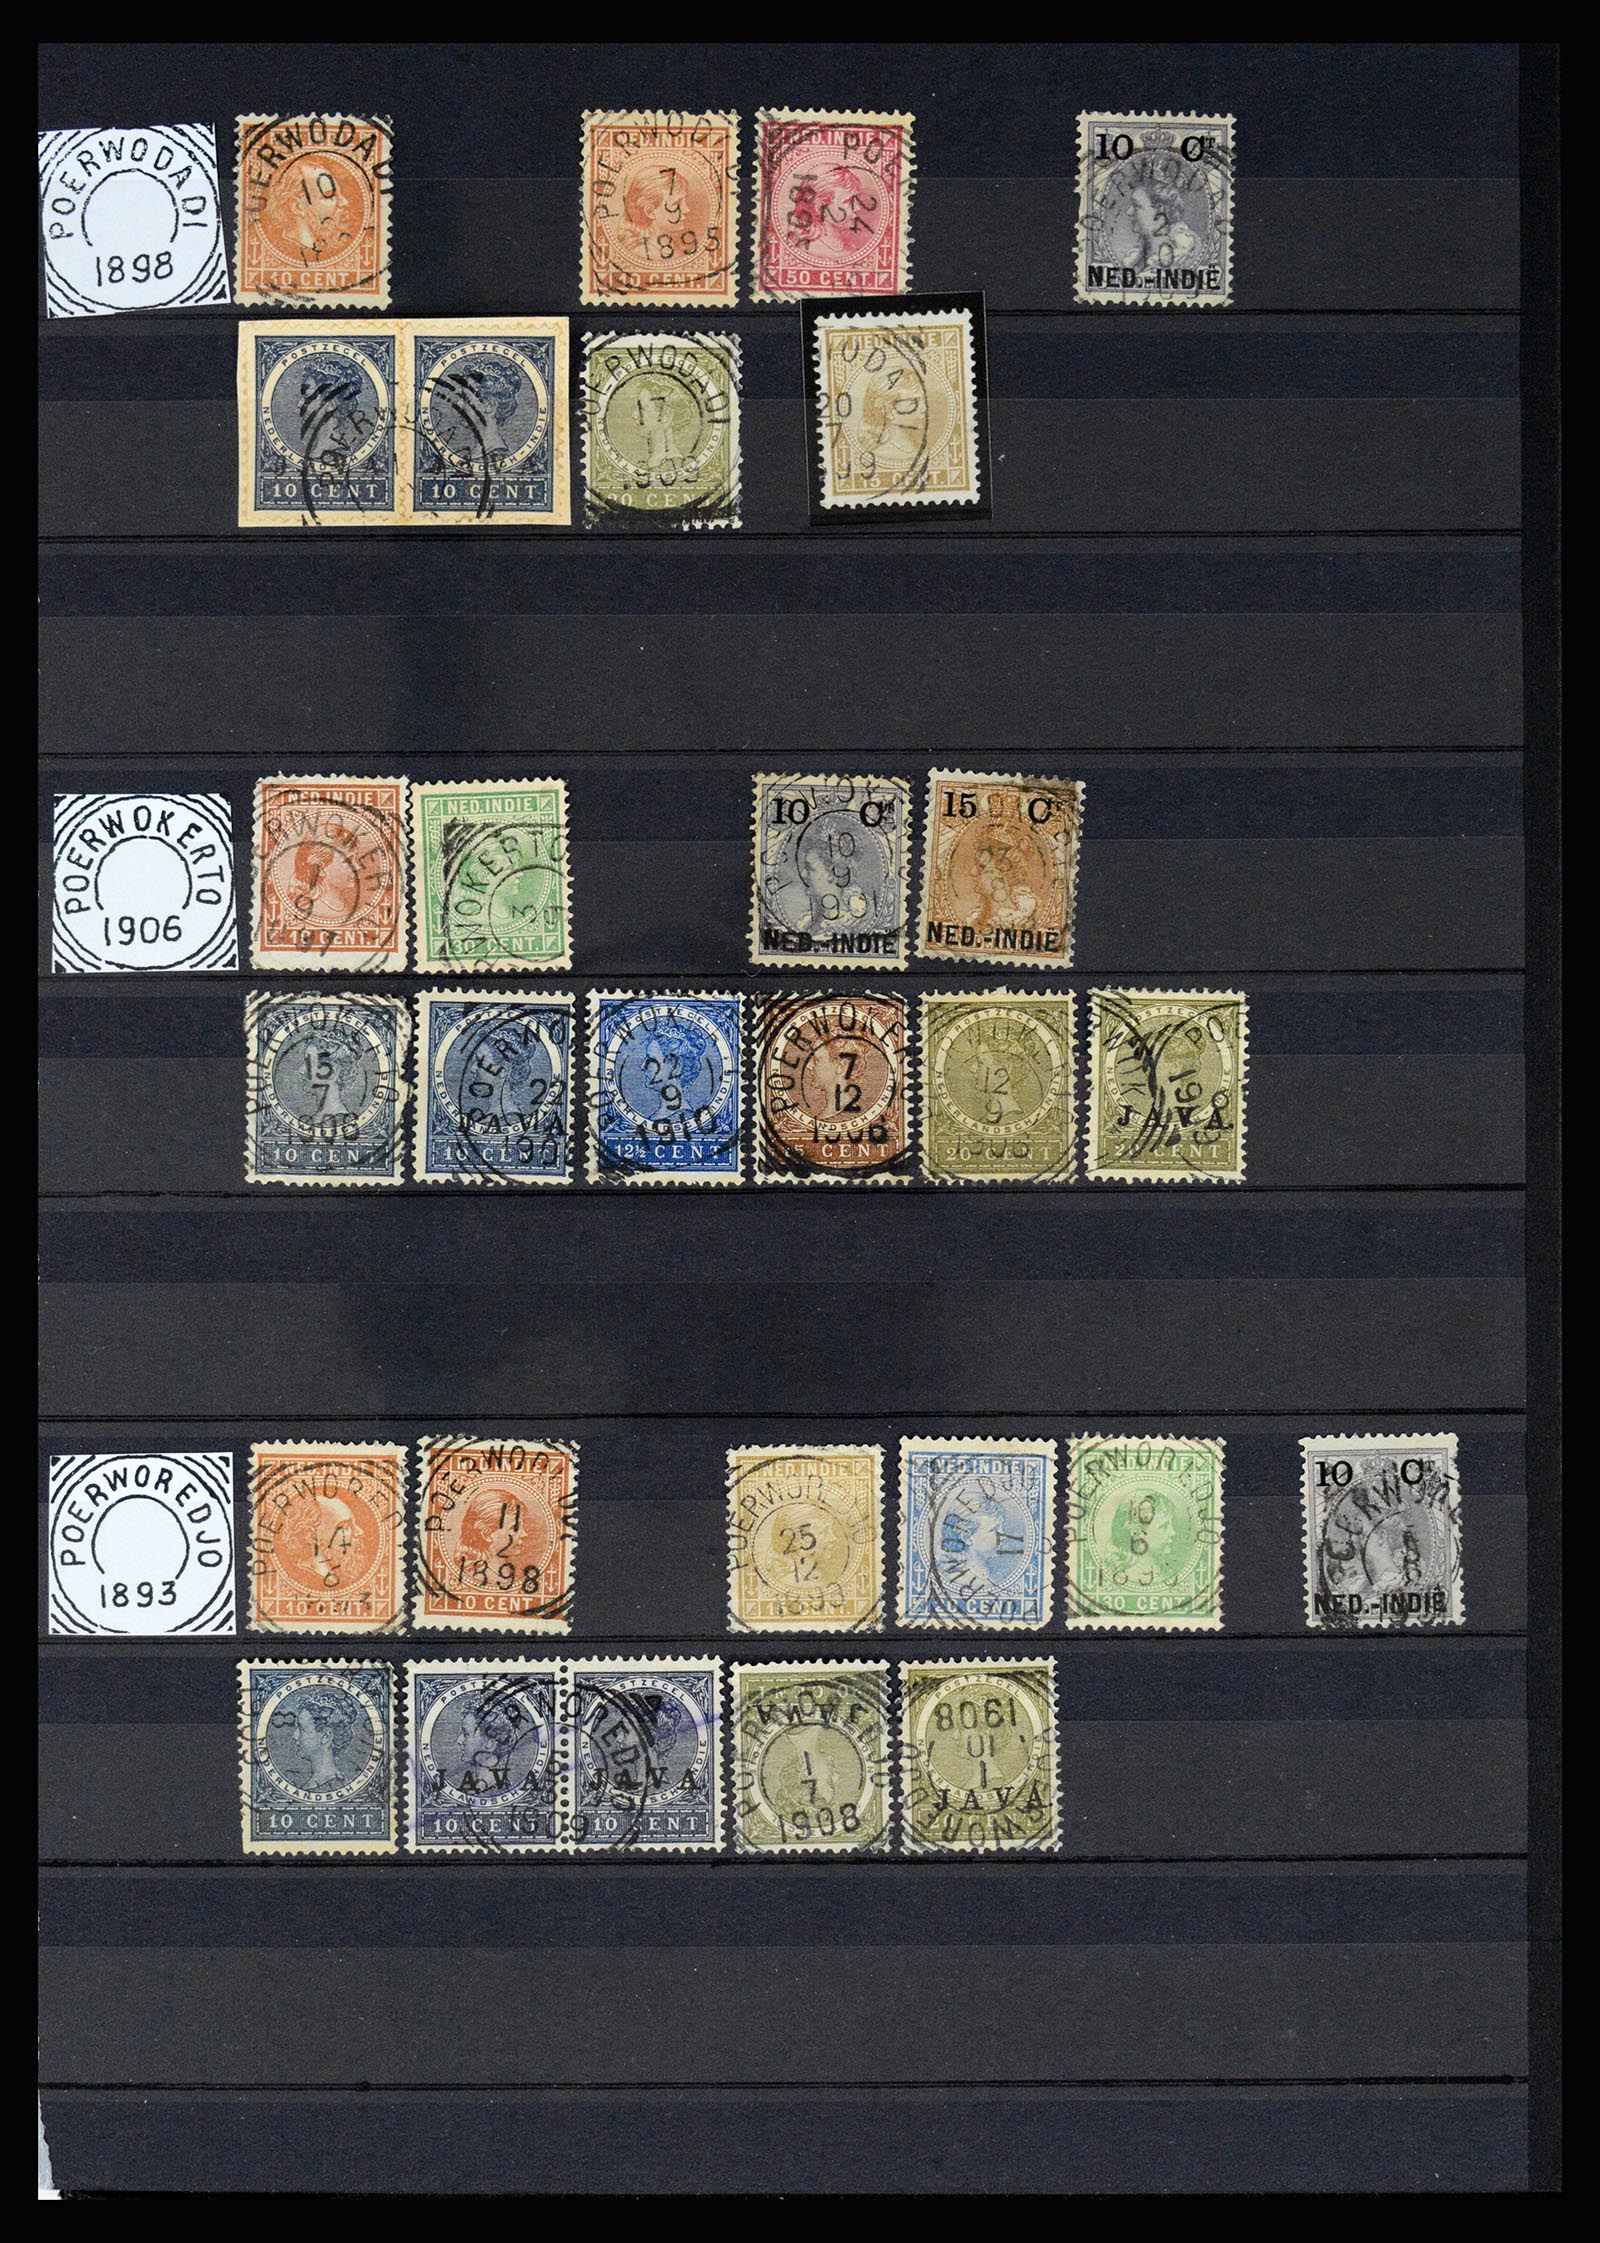 36839 040 - Stamp collection 36839 Dutch east Indies square cancels.